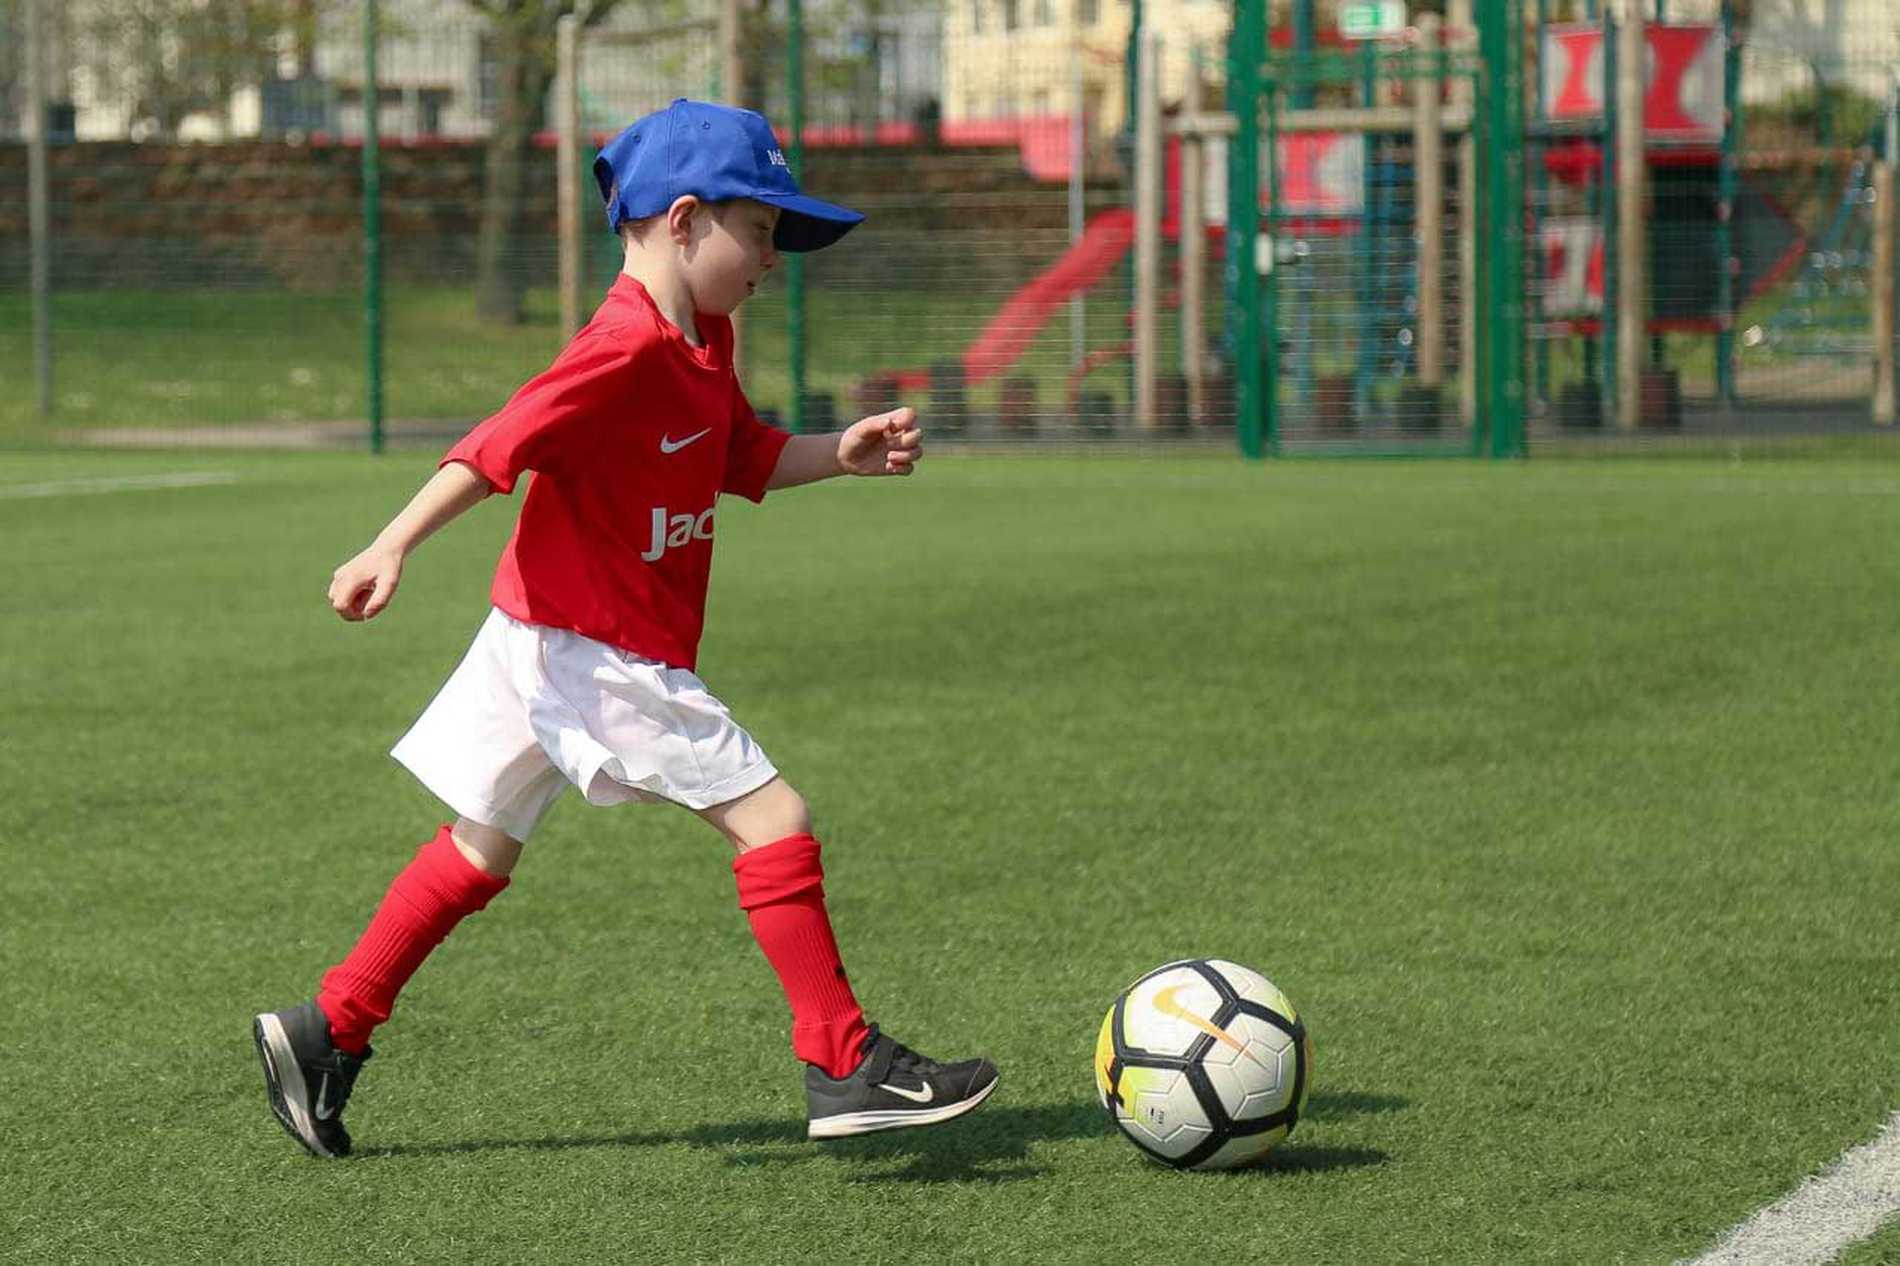 Wish child Jayden running with a ball on the football pitch